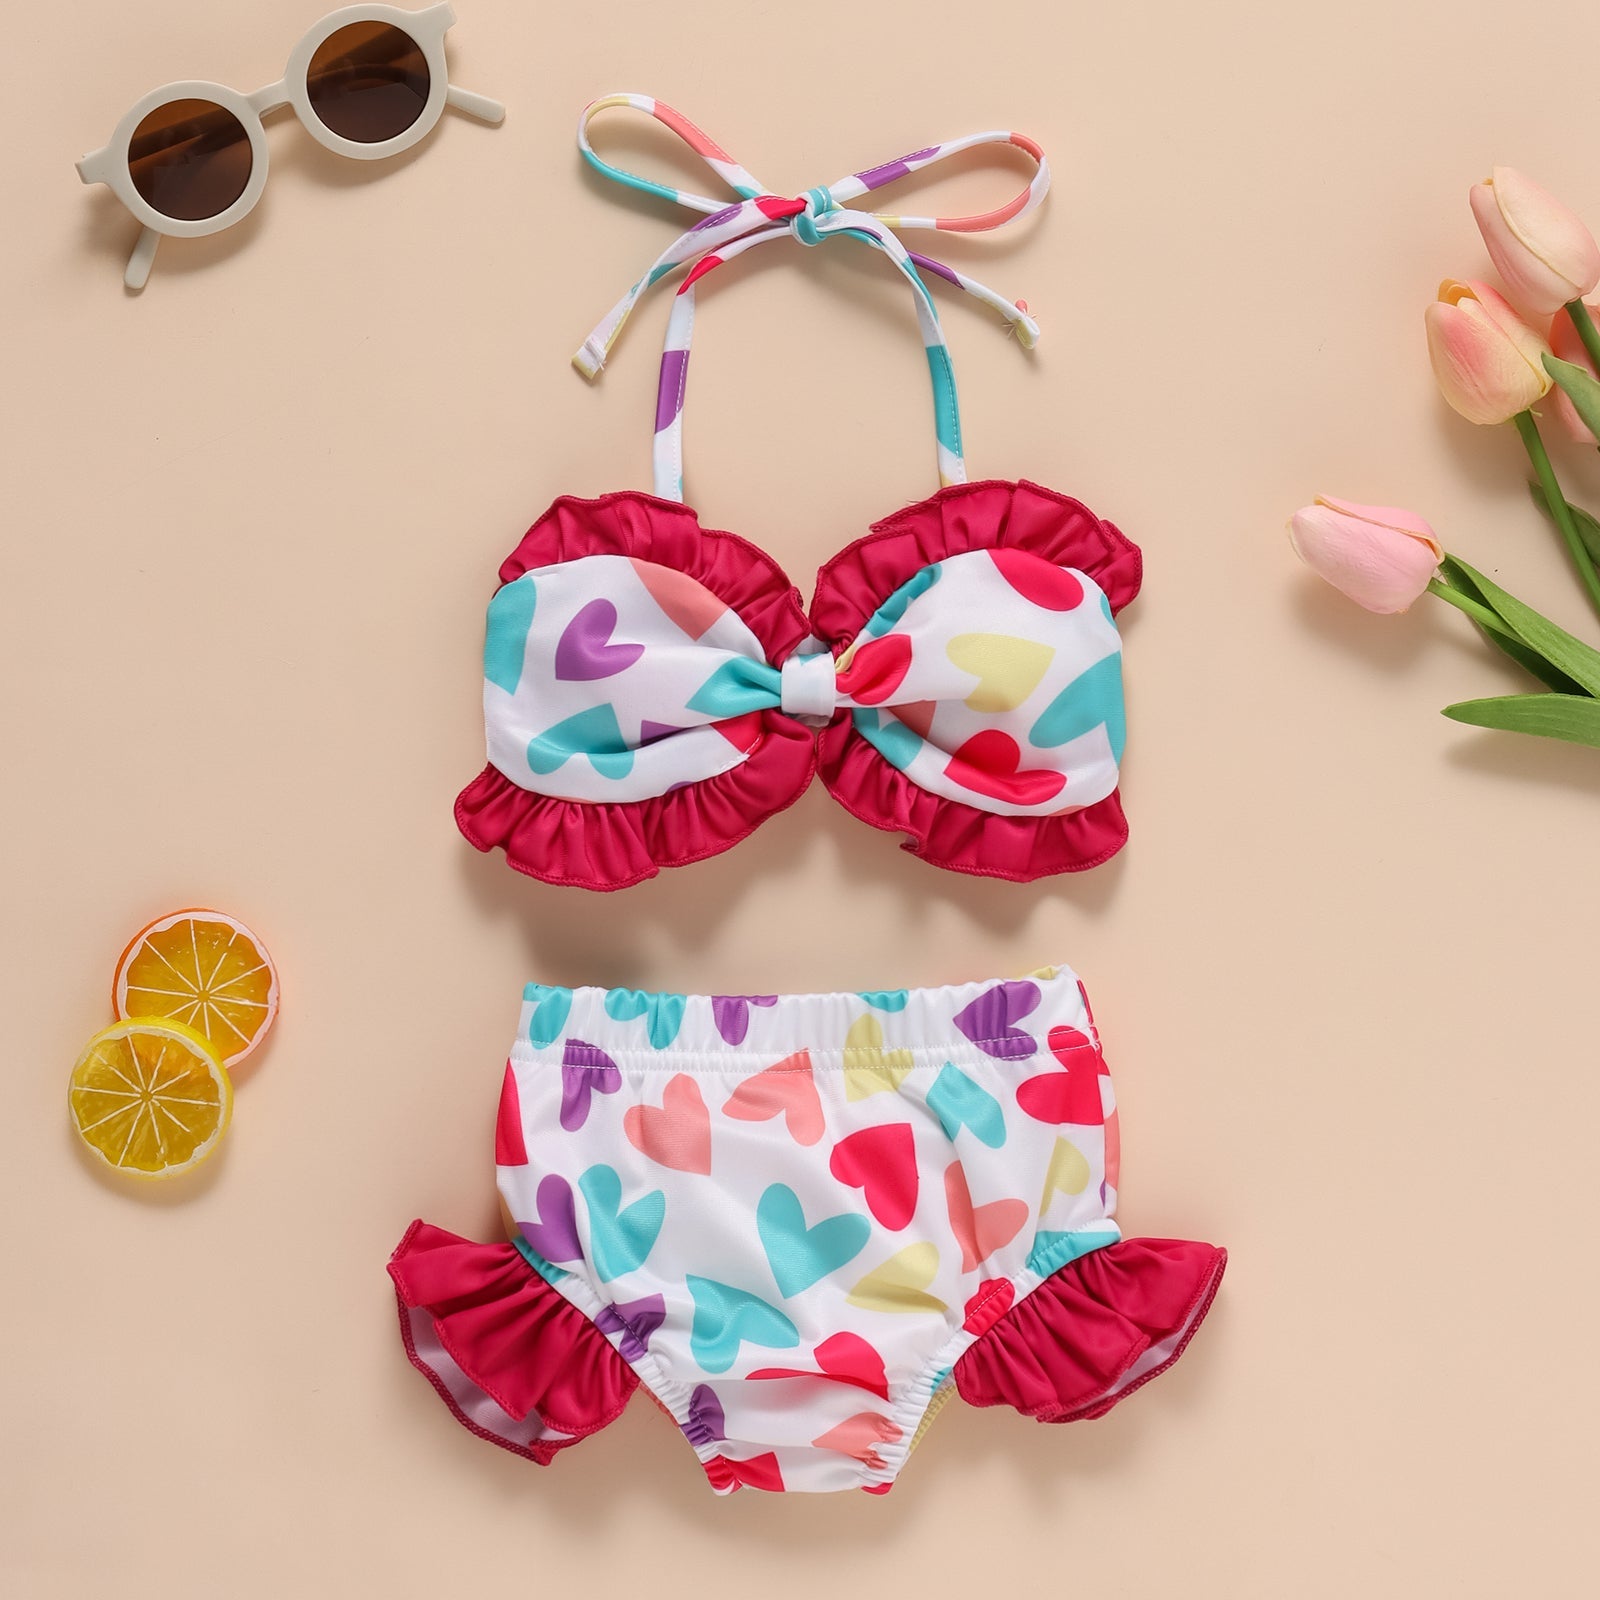 2-Piece Heart Printed Swimsuit.